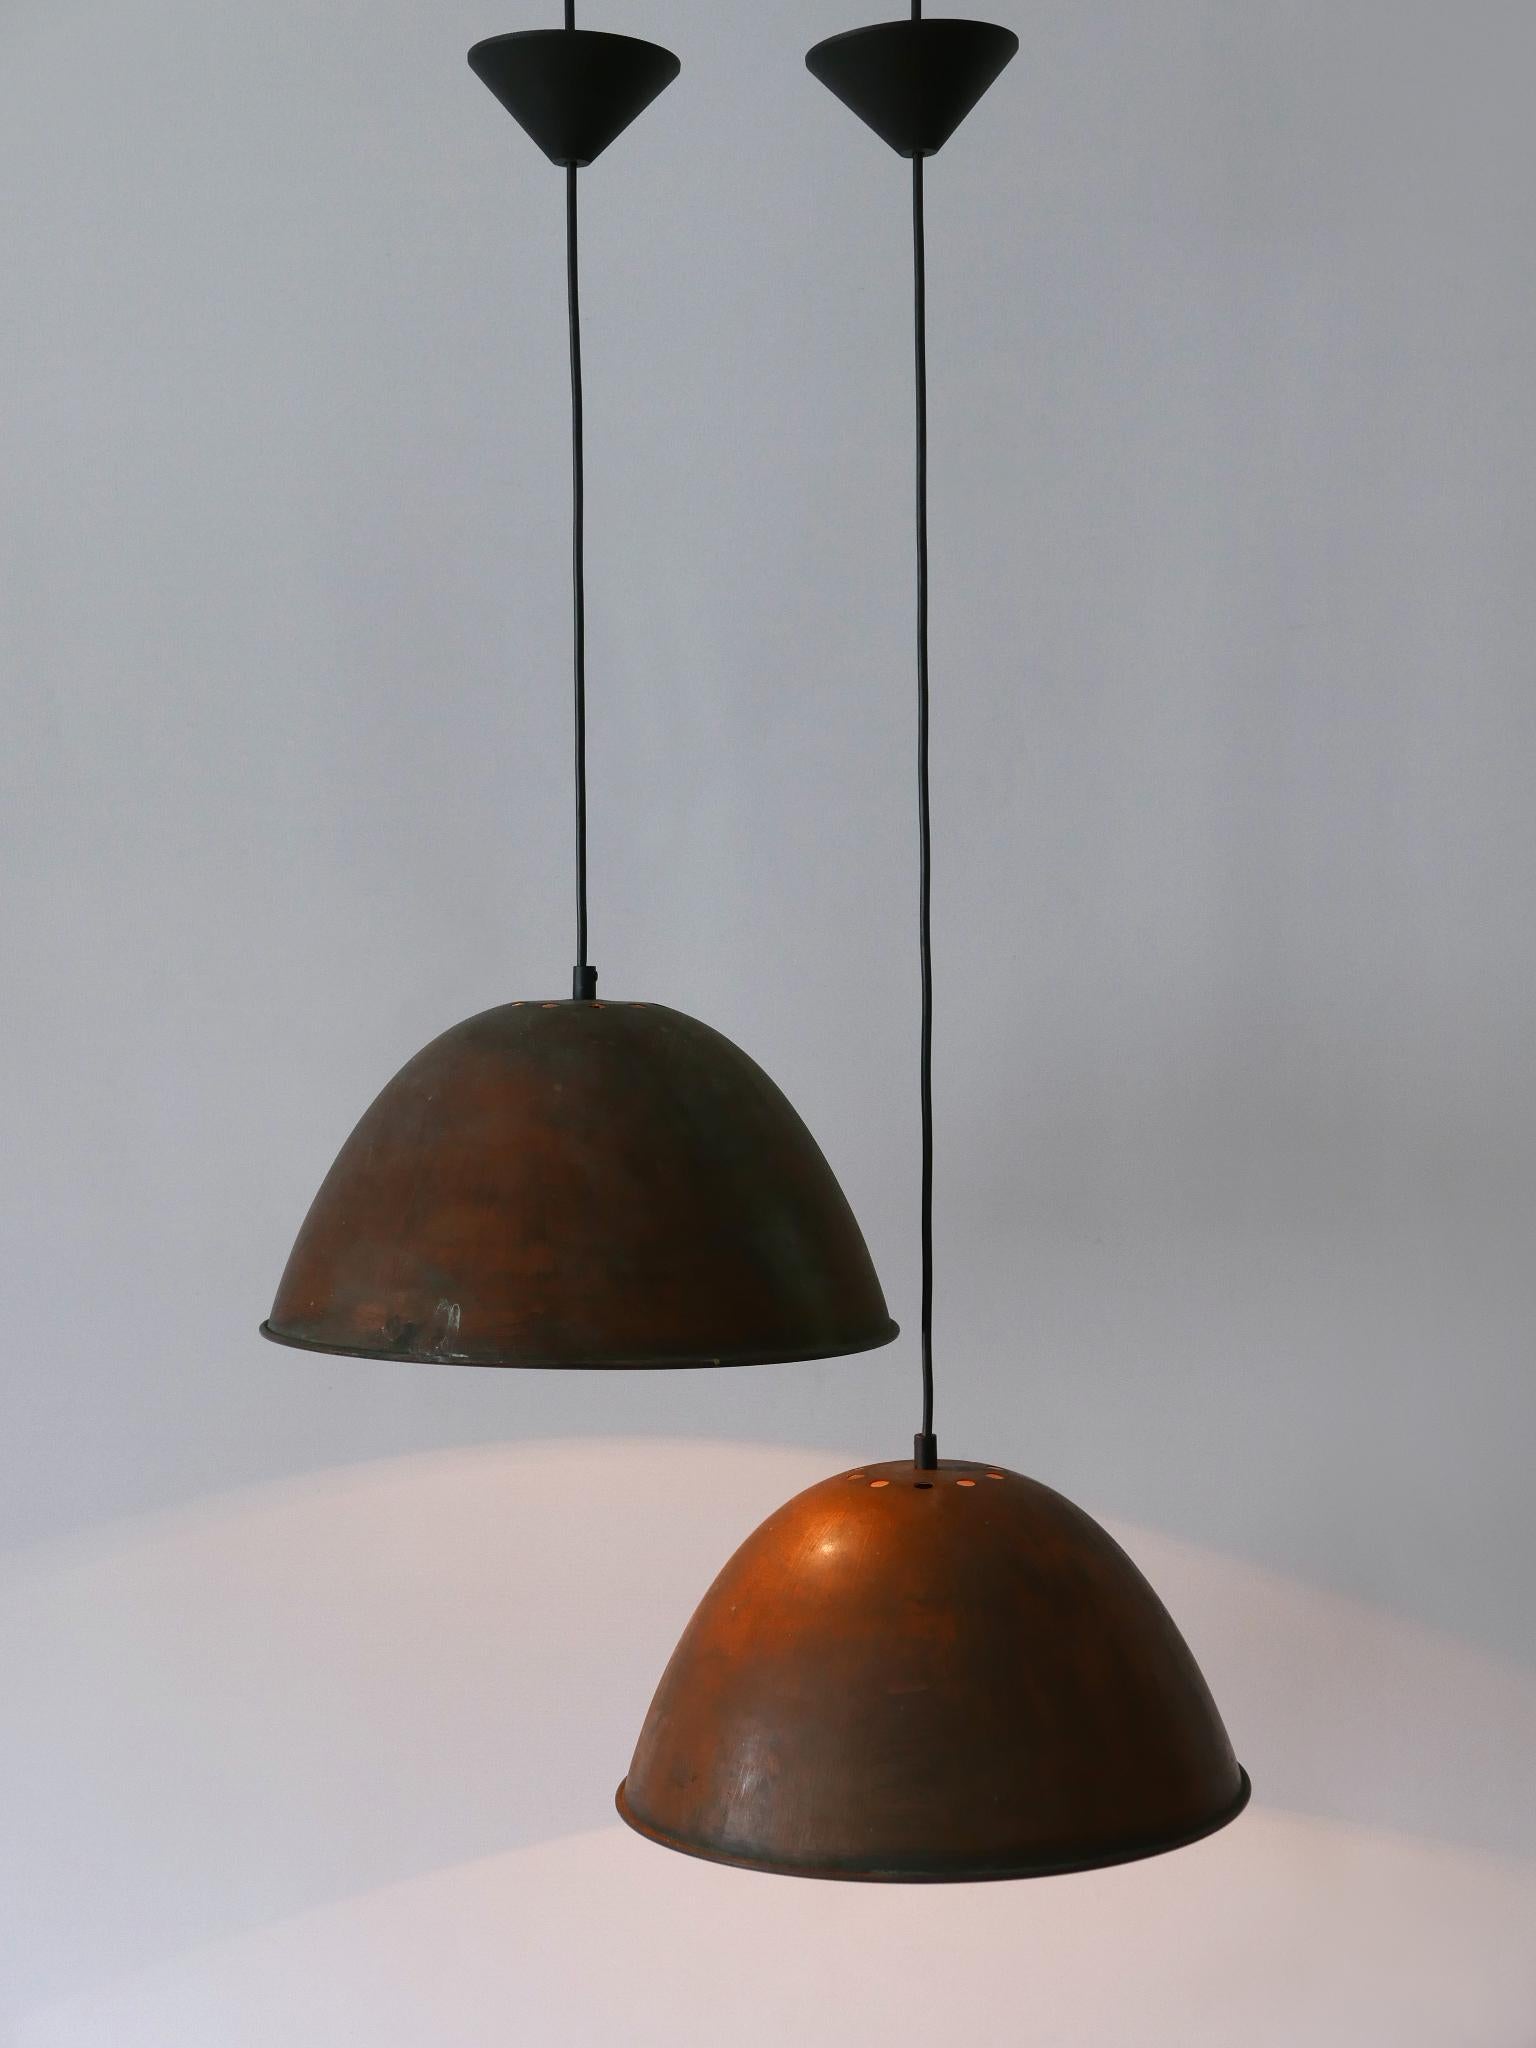 Set of Two Mid-Century Modern Copper Pendant Lamps or Hanging Lights 1950s In Good Condition For Sale In Munich, DE